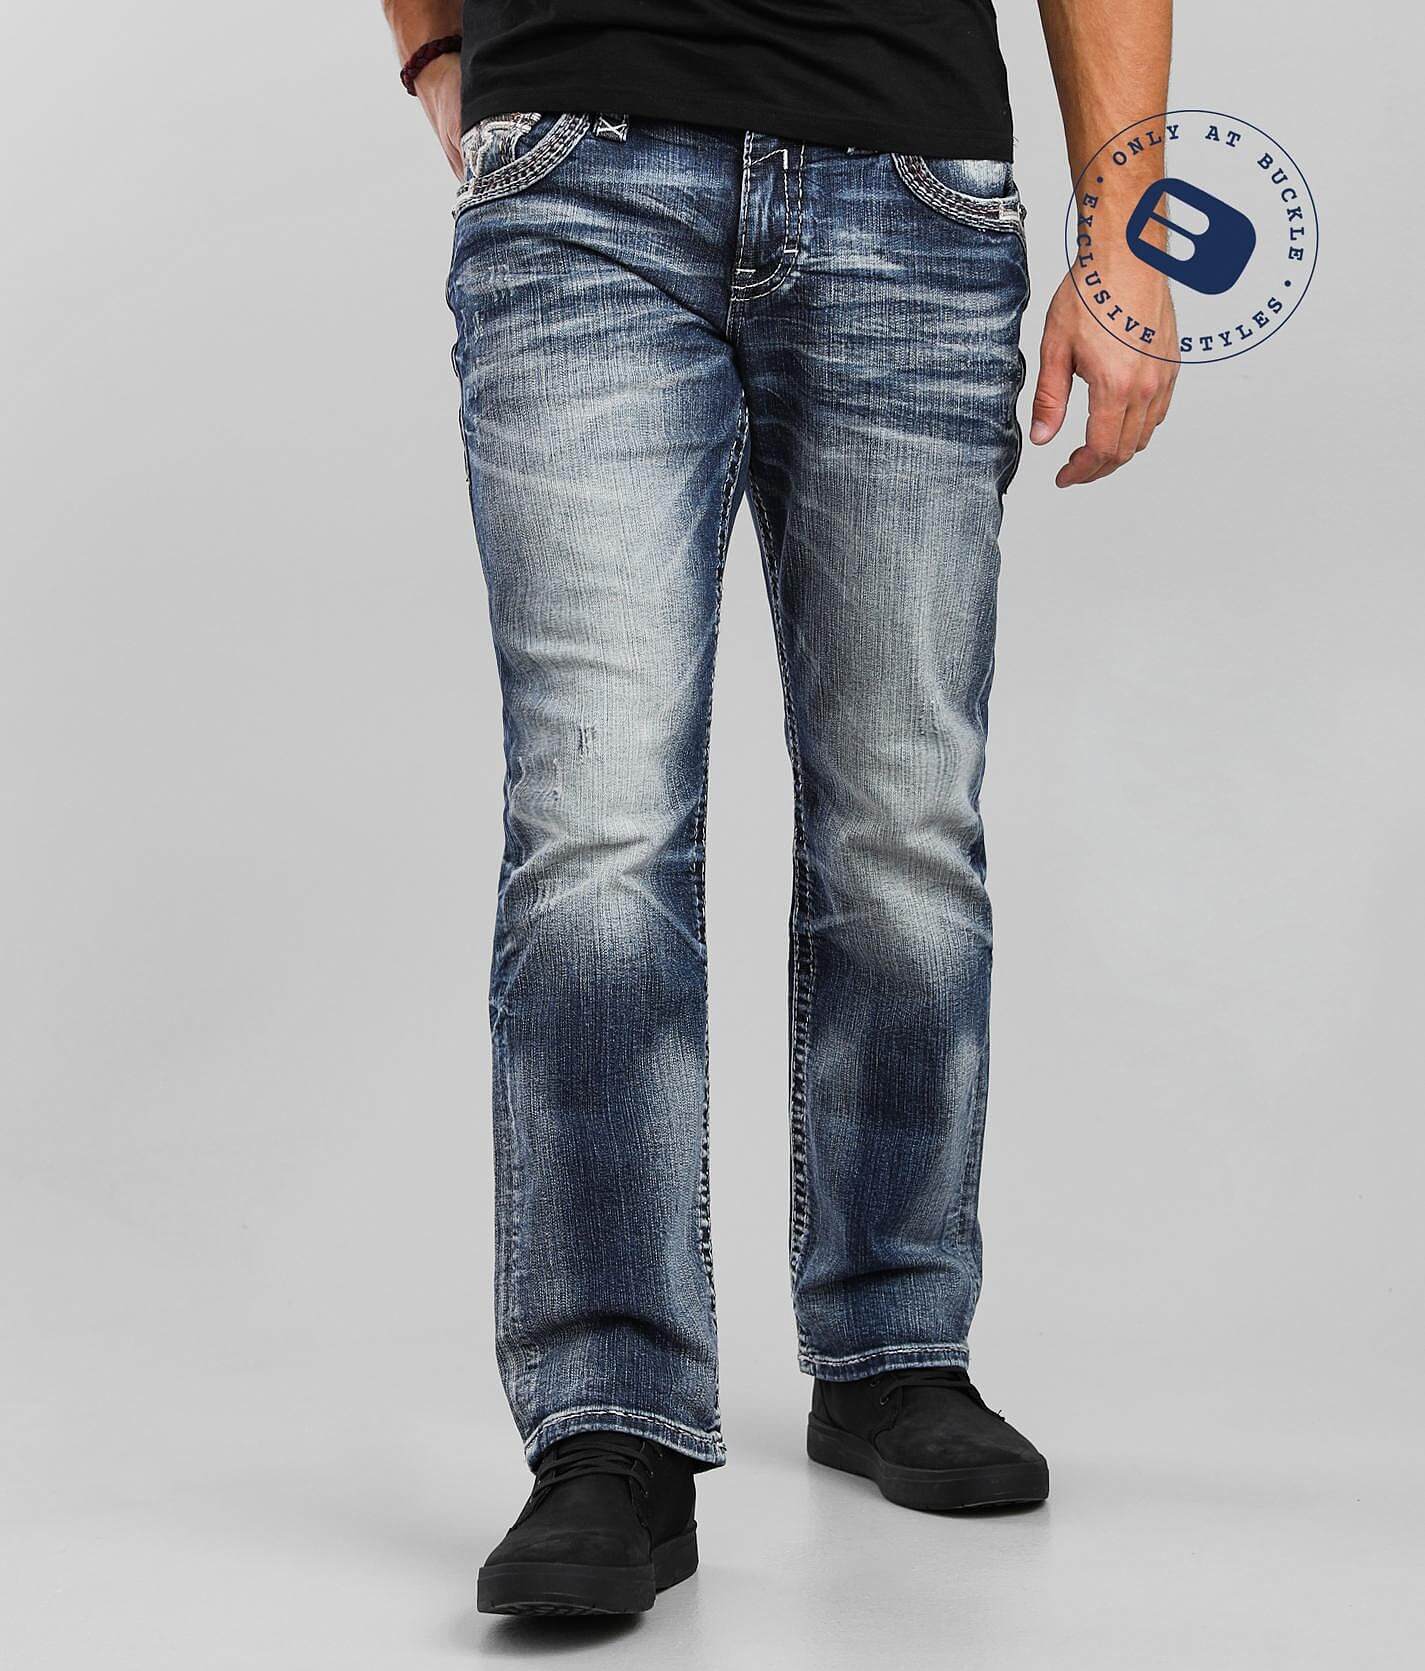 rock revival jean outfit